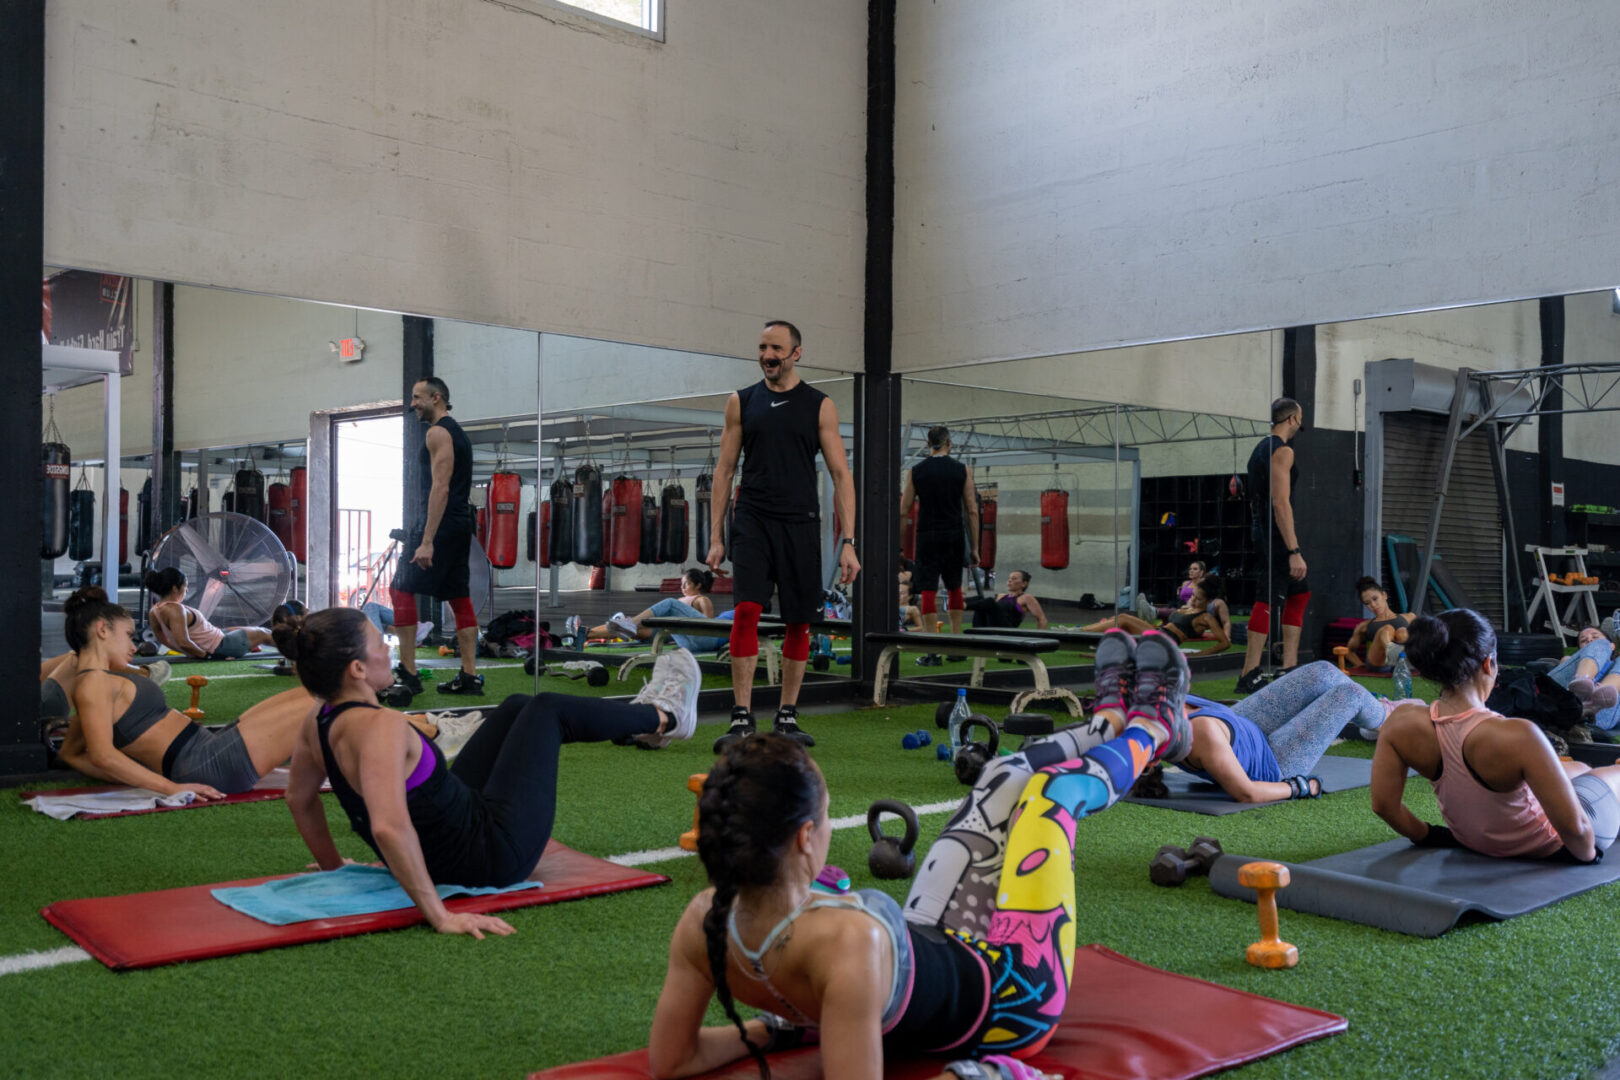 A group of people in the gym doing different exercises.